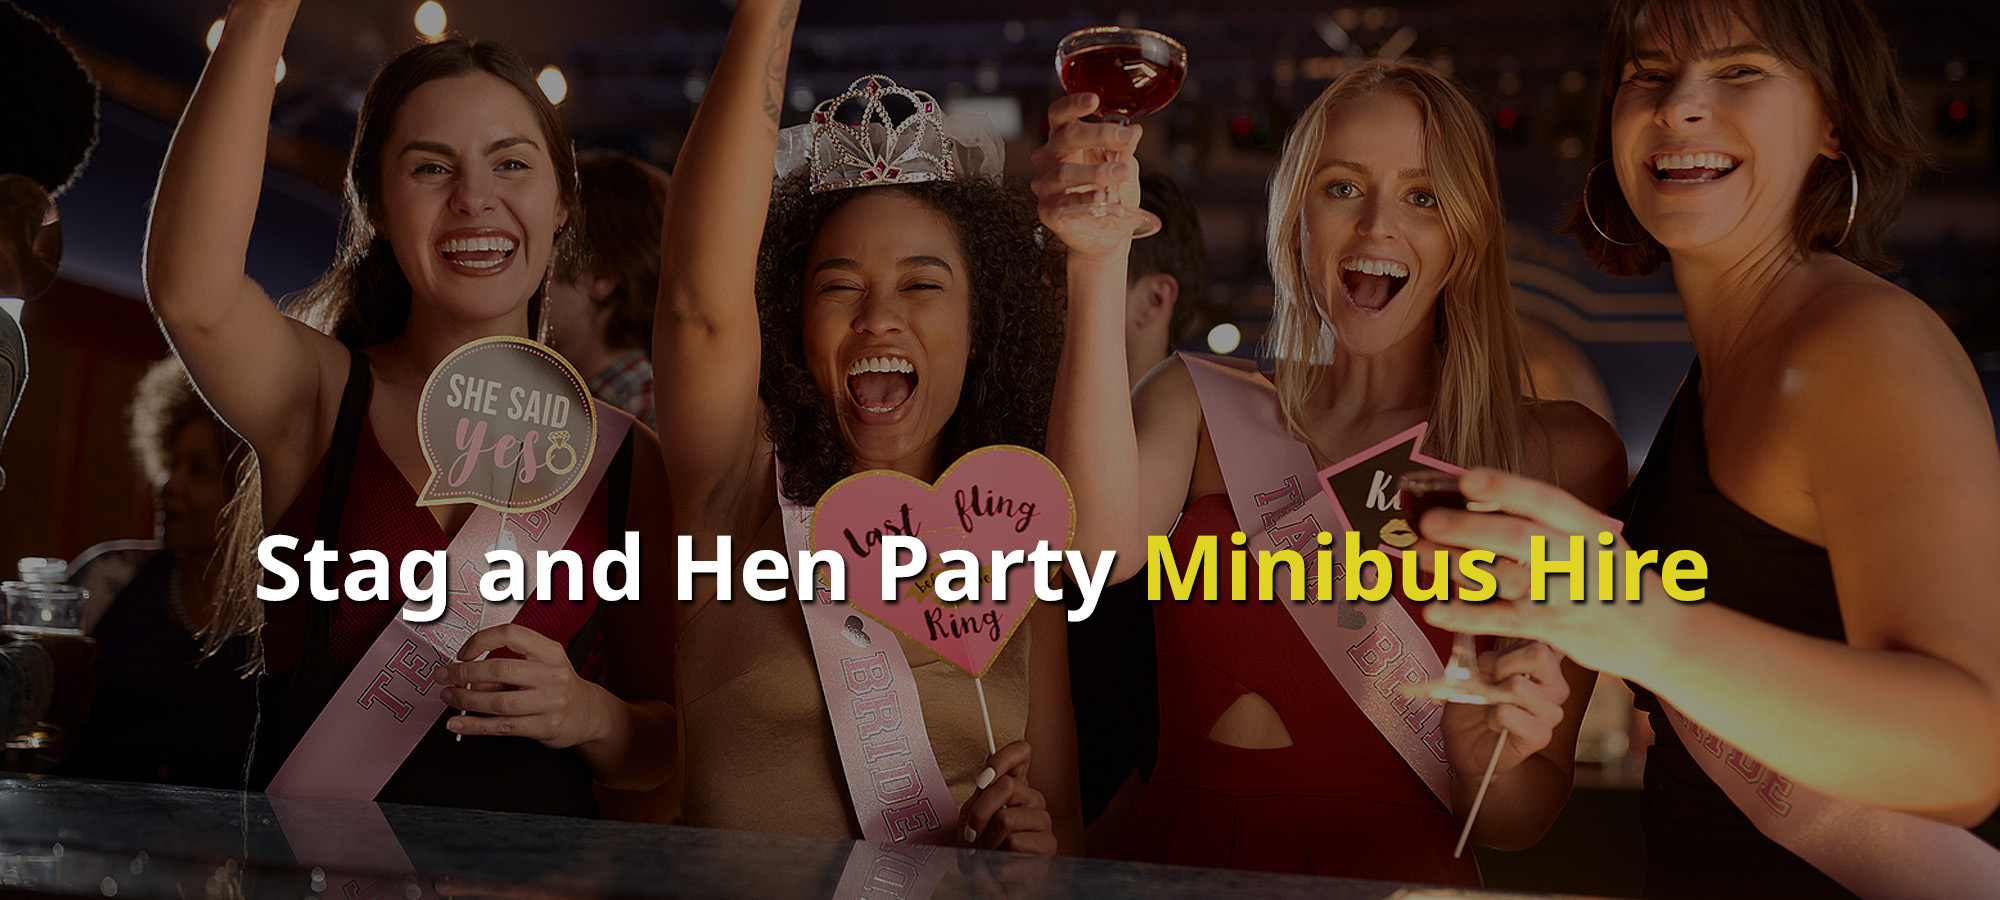 Stag and Hen Party Minibus Hire